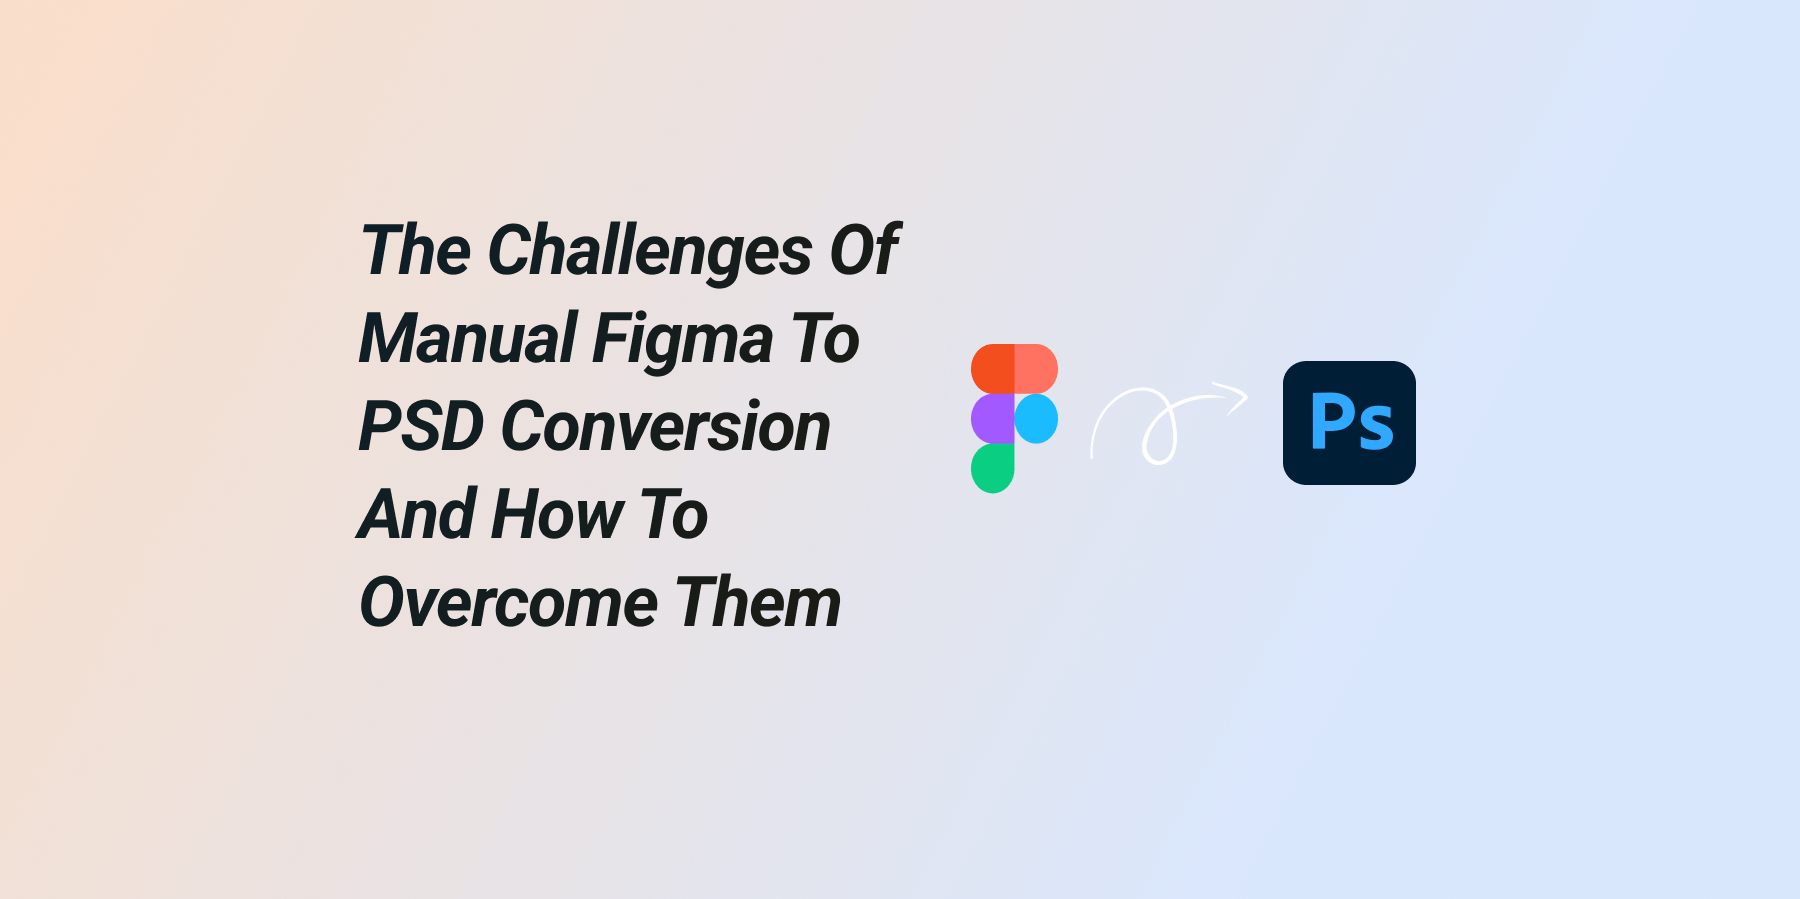 The Challenges of Manual Figma to PSD Conversion and How to Overcome Them